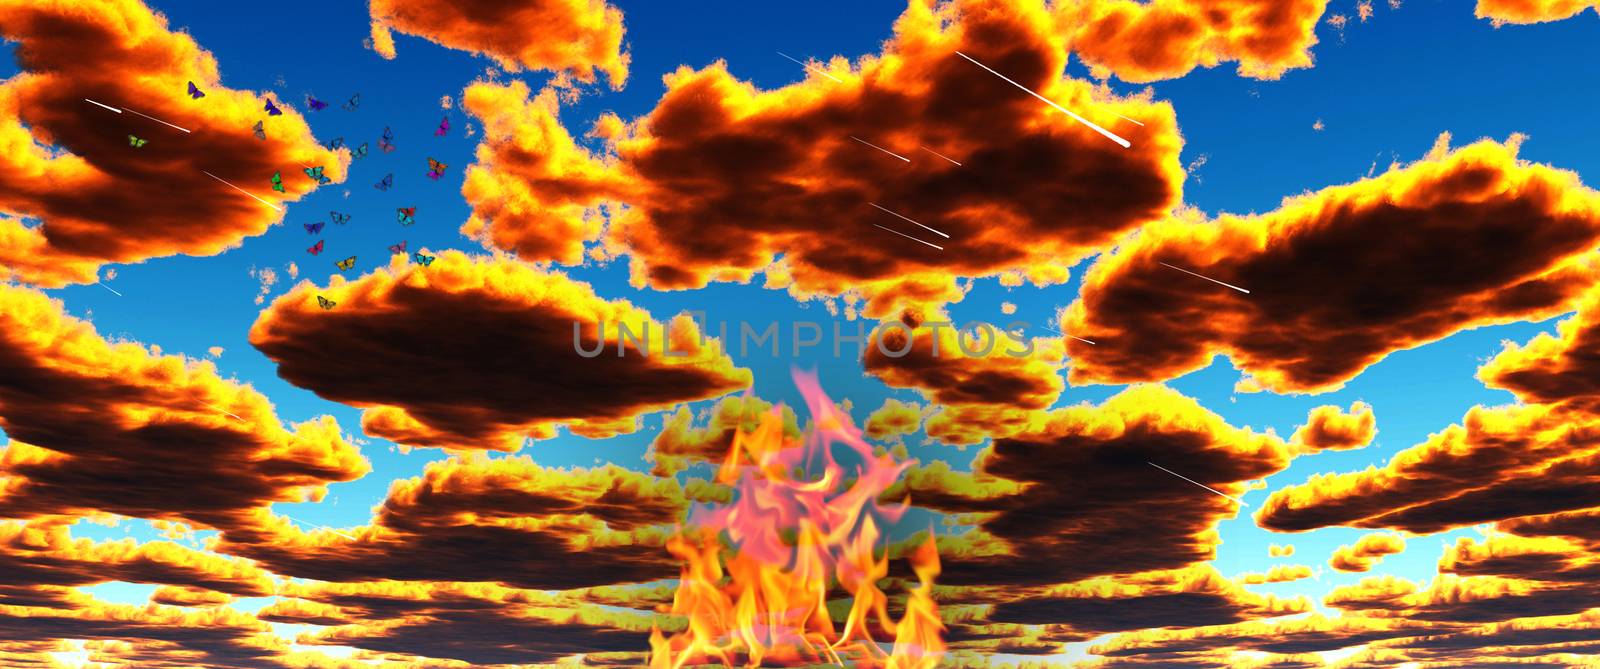 Surreal landscape. Fire in the sky. Butterflies in vivid clouds